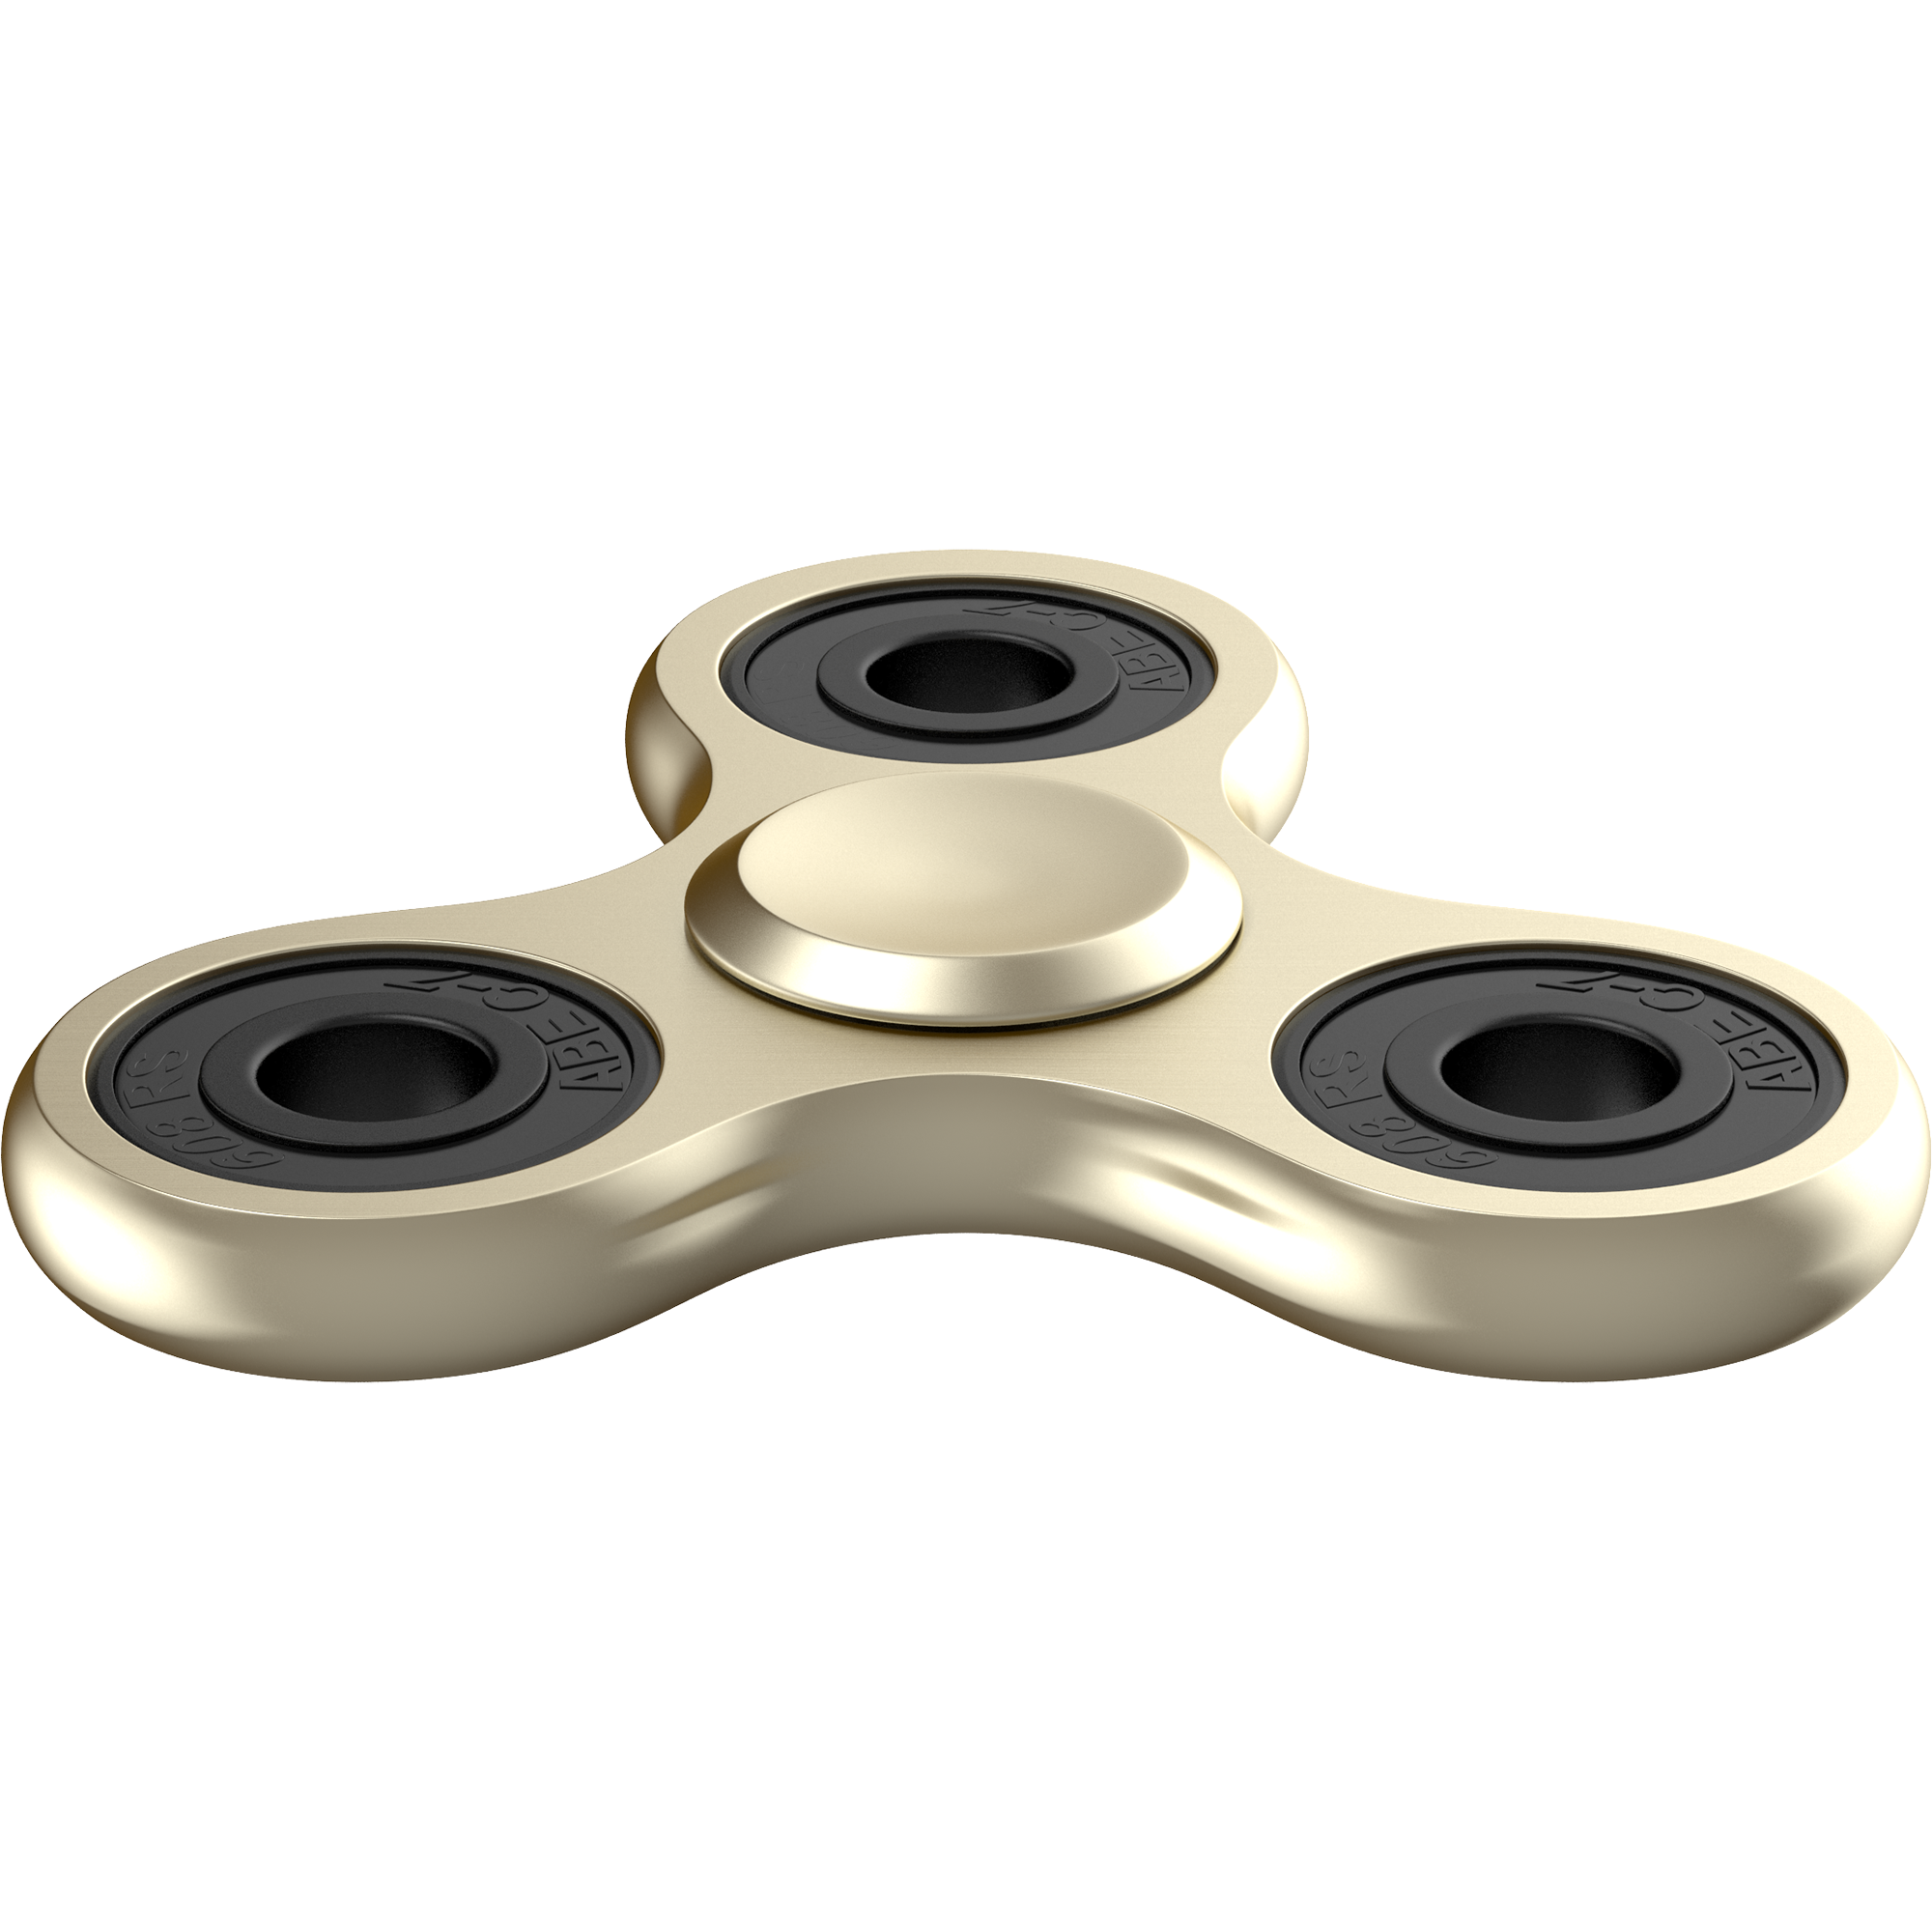 Alloy Gold 360 Spinner Focus Fidget Toy Tri-Spinner Focus Toy for Kids & Adults - image 2 of 5